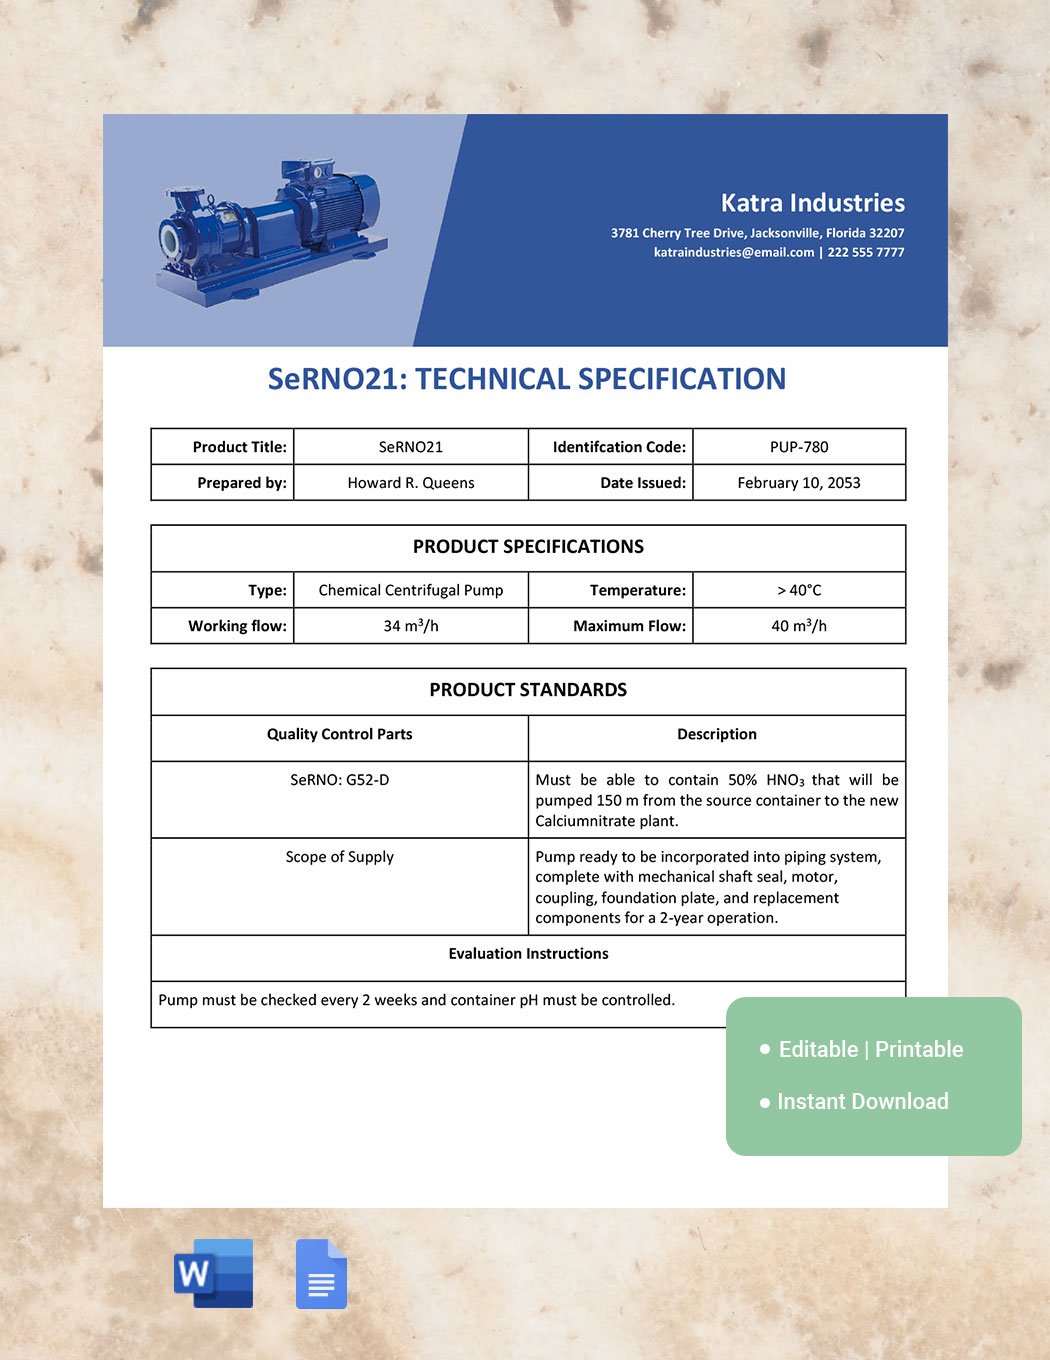 Equipment Technical Specification Template in Word, Google Docs